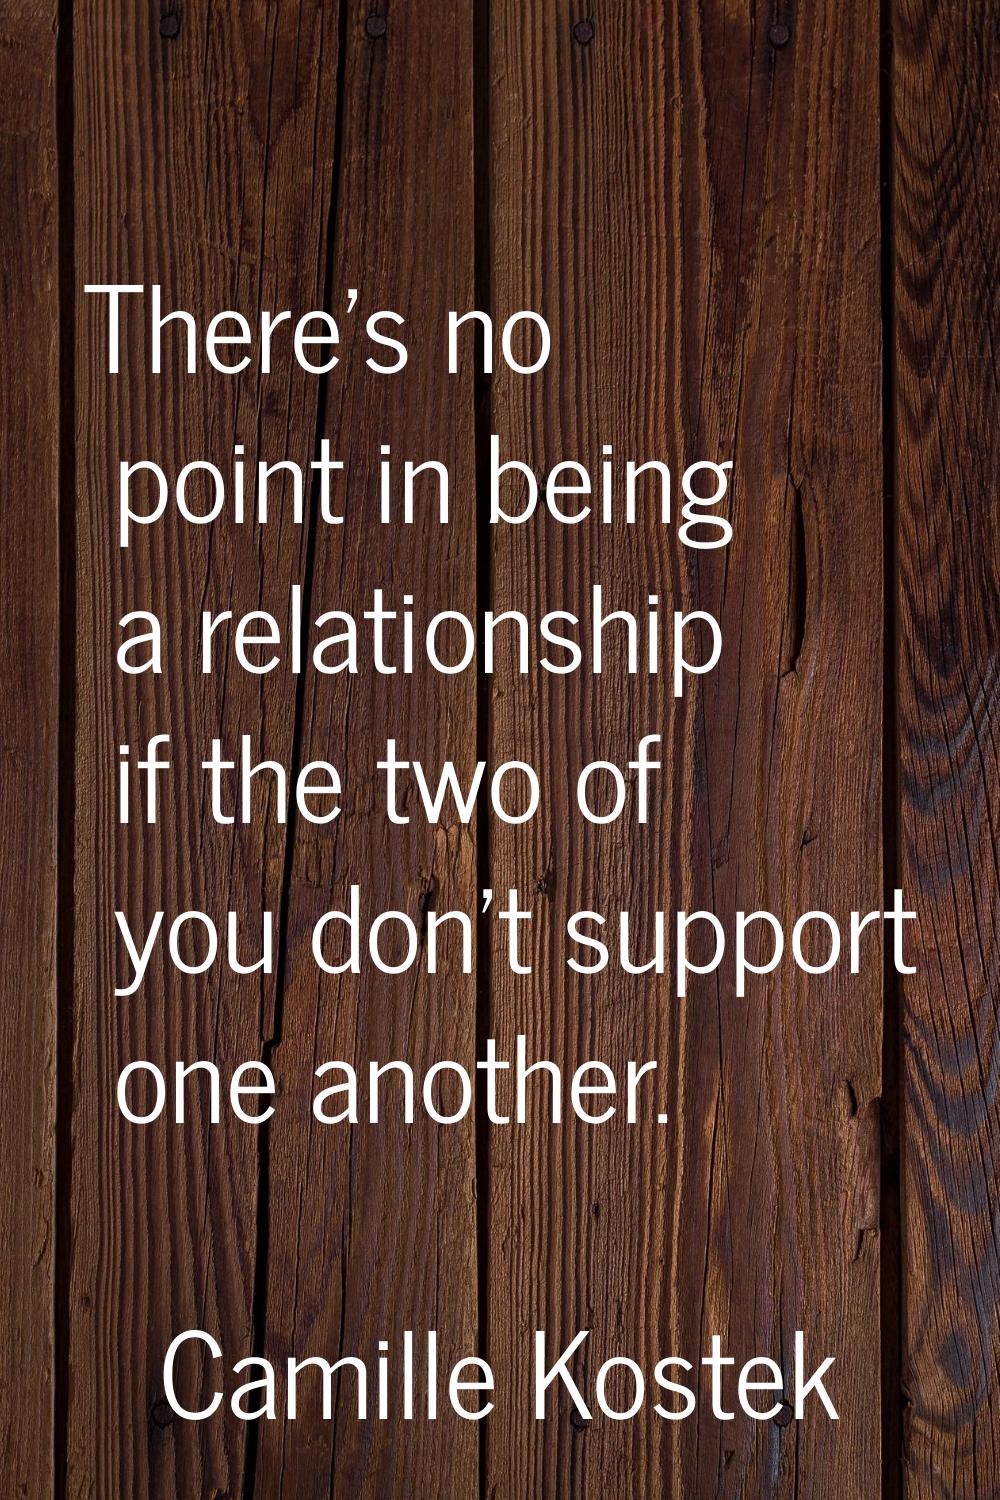 There's no point in being a relationship if the two of you don't support one another.